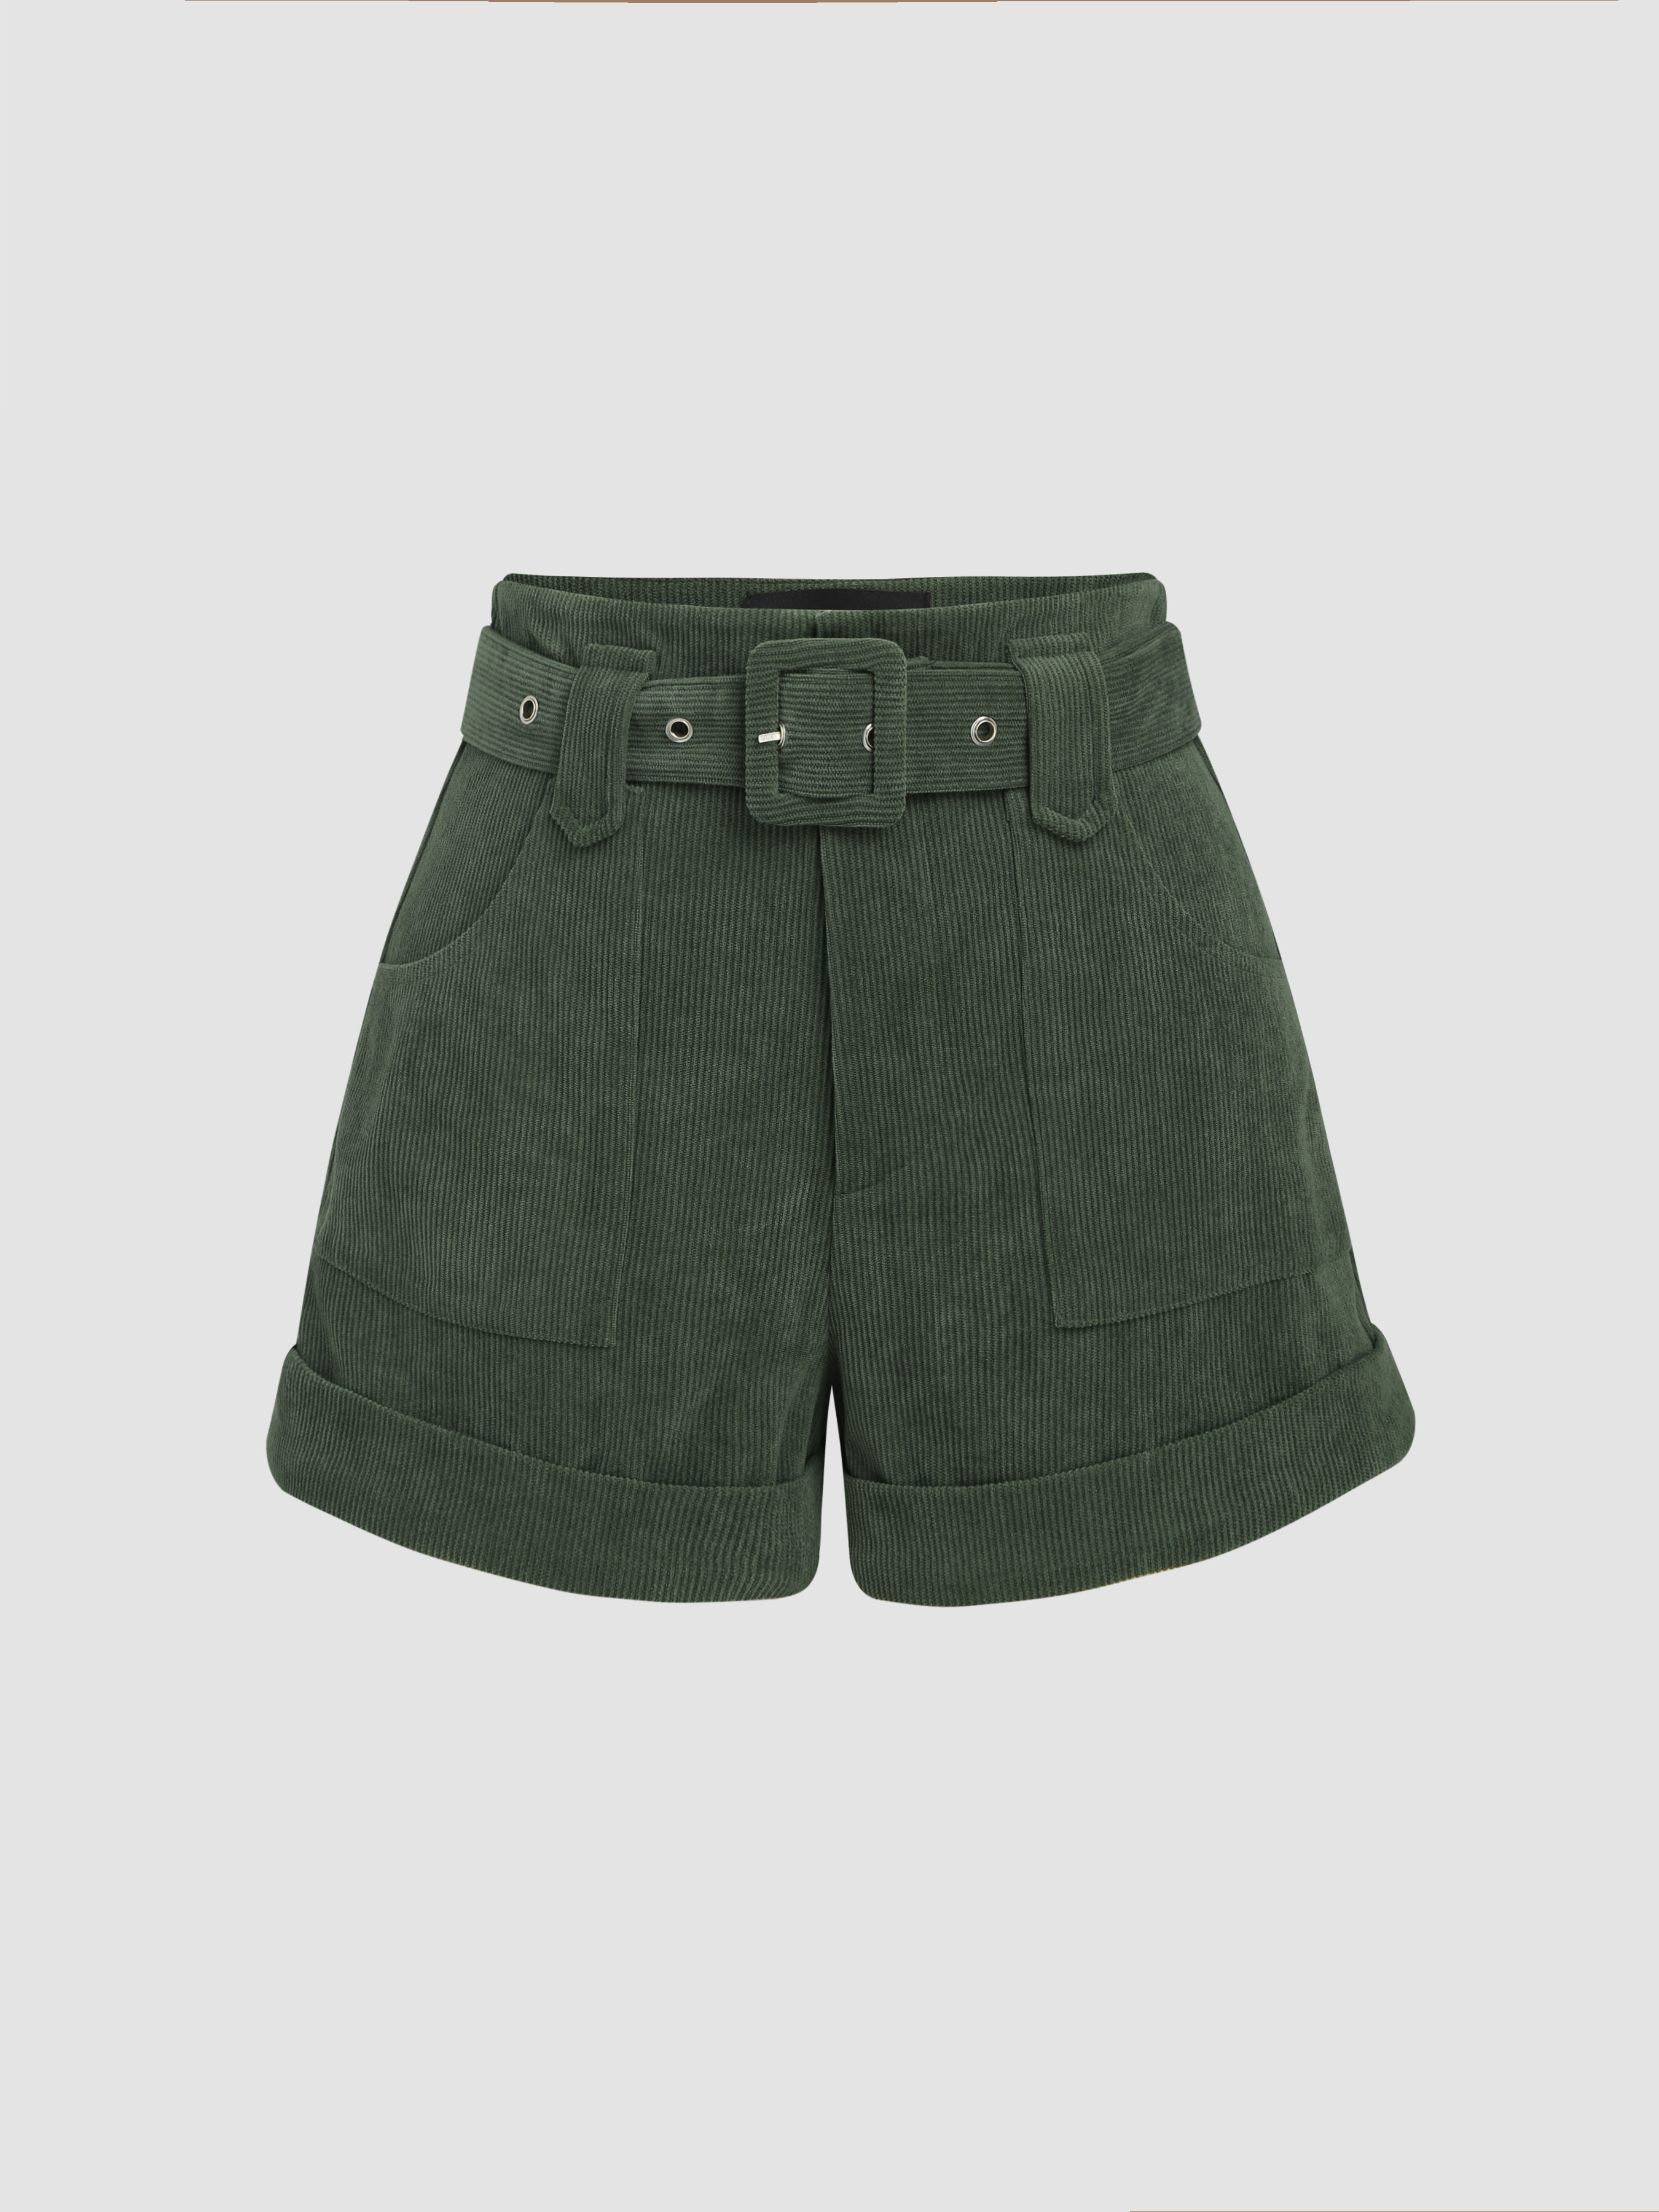 Solid Corduroy Middle Waist Shorts with Belt